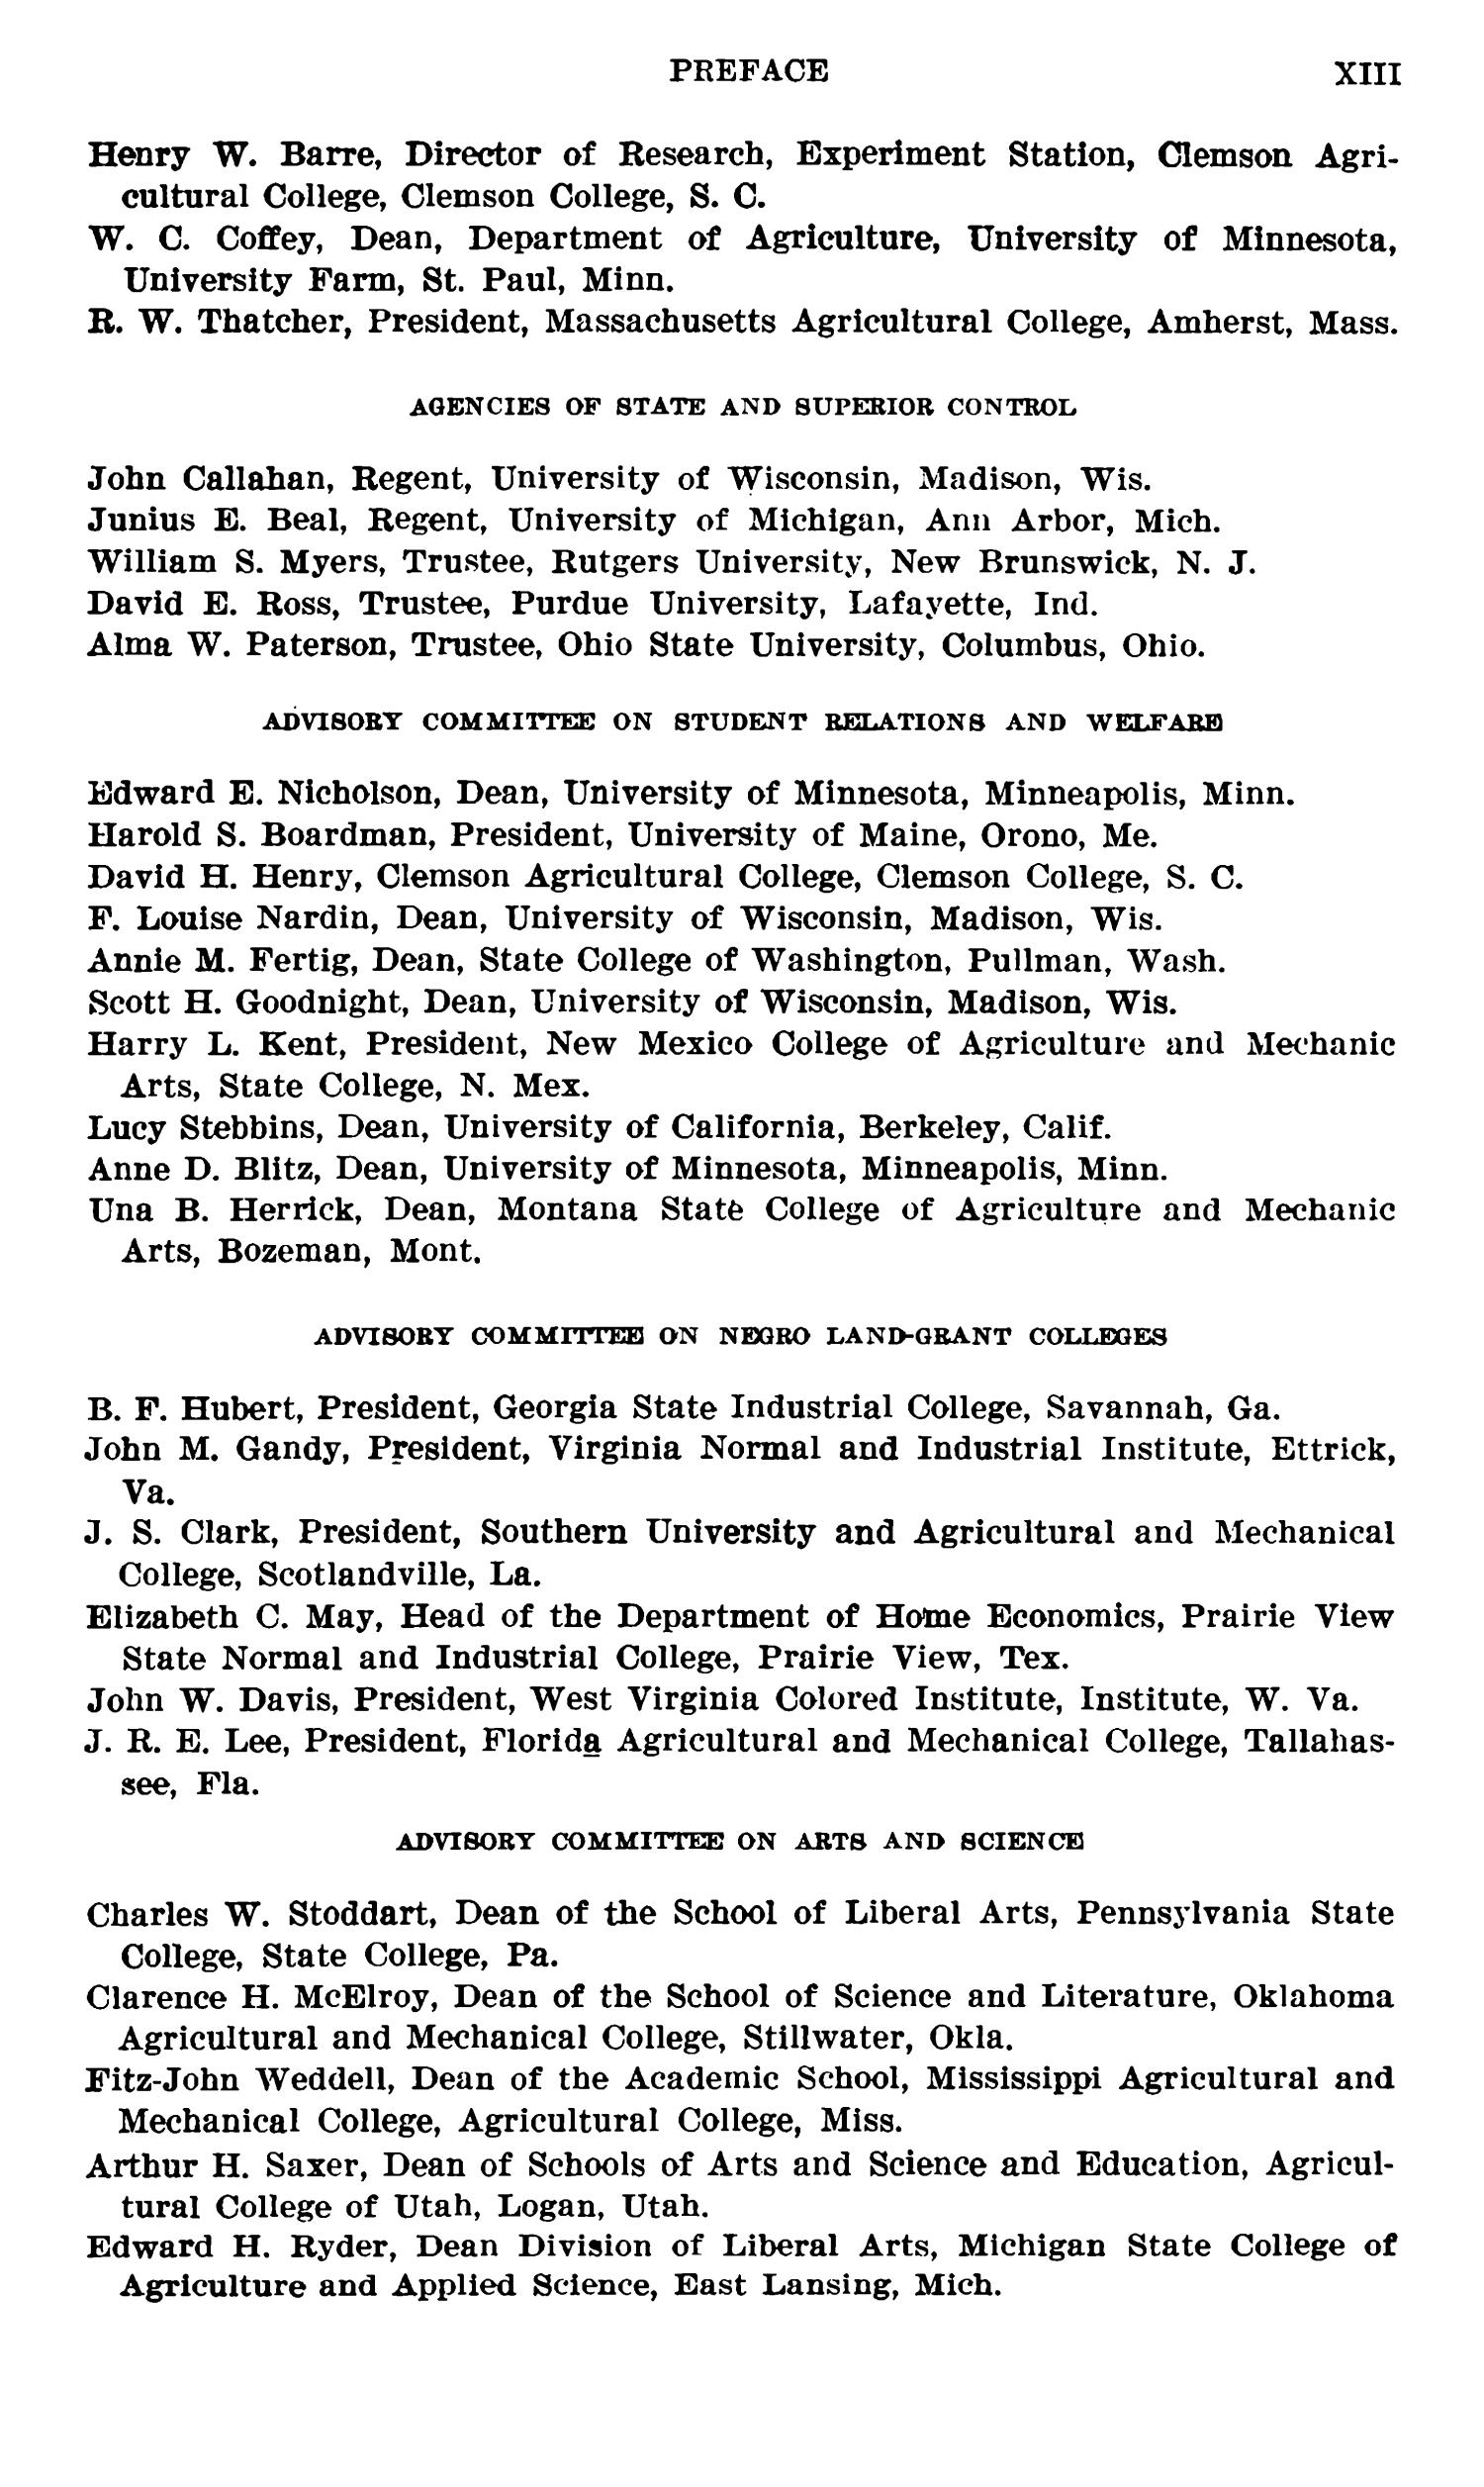 Survey of Land-Grant Colleges and Universities, Volume 1
                                                
                                                    XIII
                                                